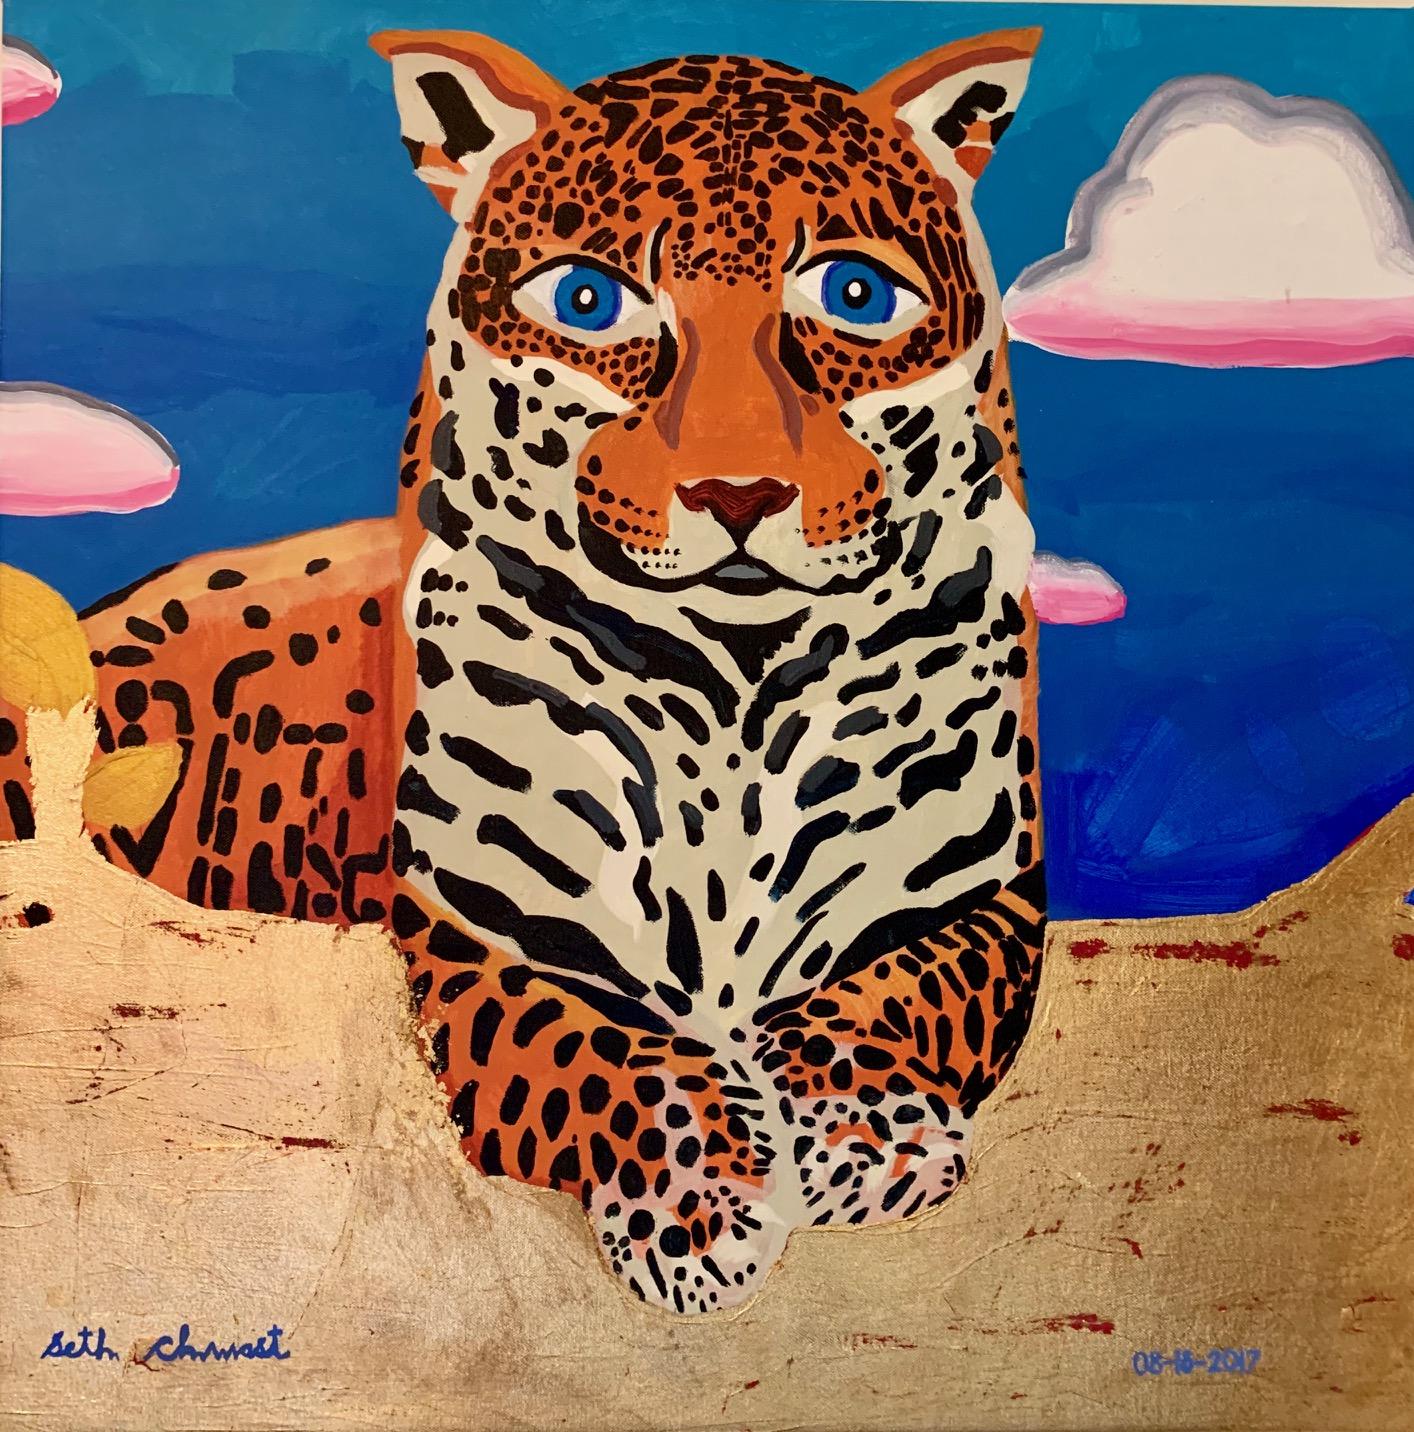 Seth Chwast "The Jaguar" Acrylic on Canvas, w Gold Leaf  27”x27” $850


Bright, gentle, and imaginative, Seth Chwast is an American artist who was diagnosed with autism at 21 months.  At 20, he took his first art class and by 23 was on the Today